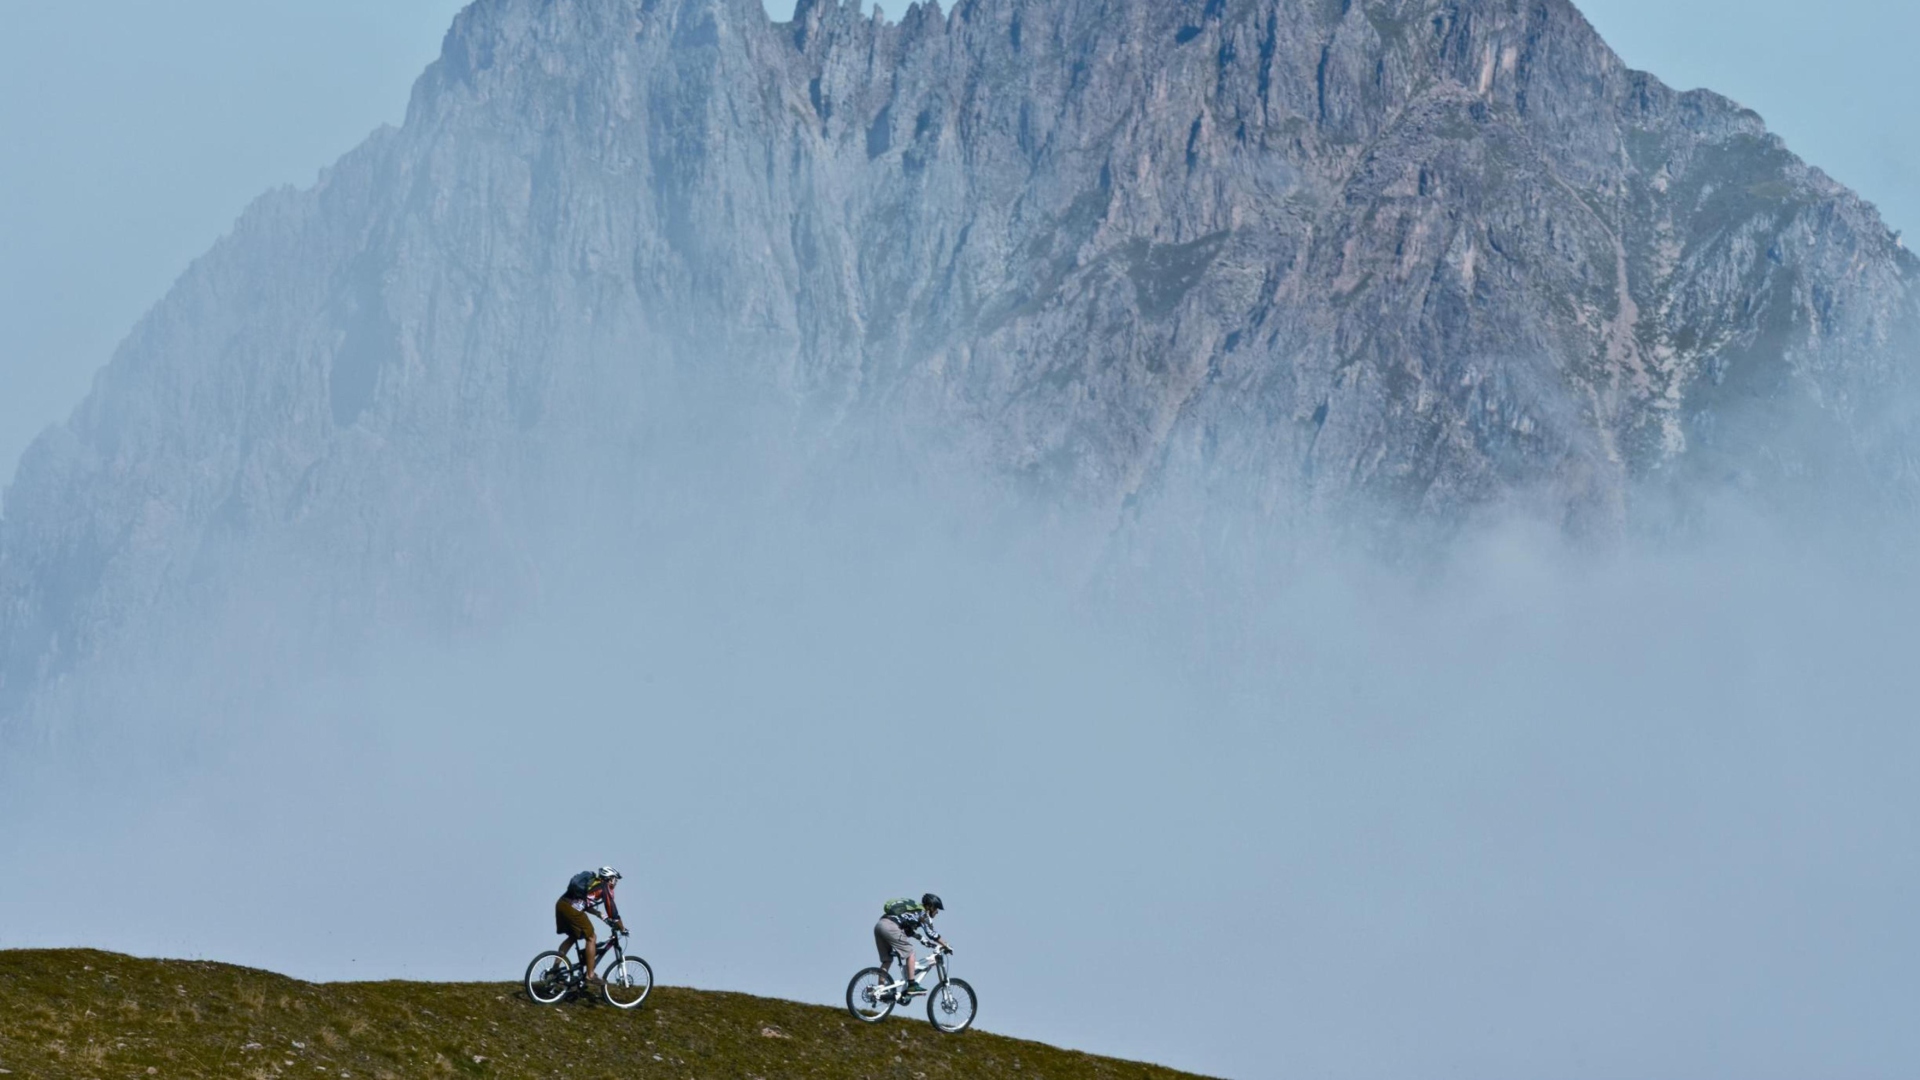 Das Bicycle Riding In Alps Mountains Wallpaper 1920x1080